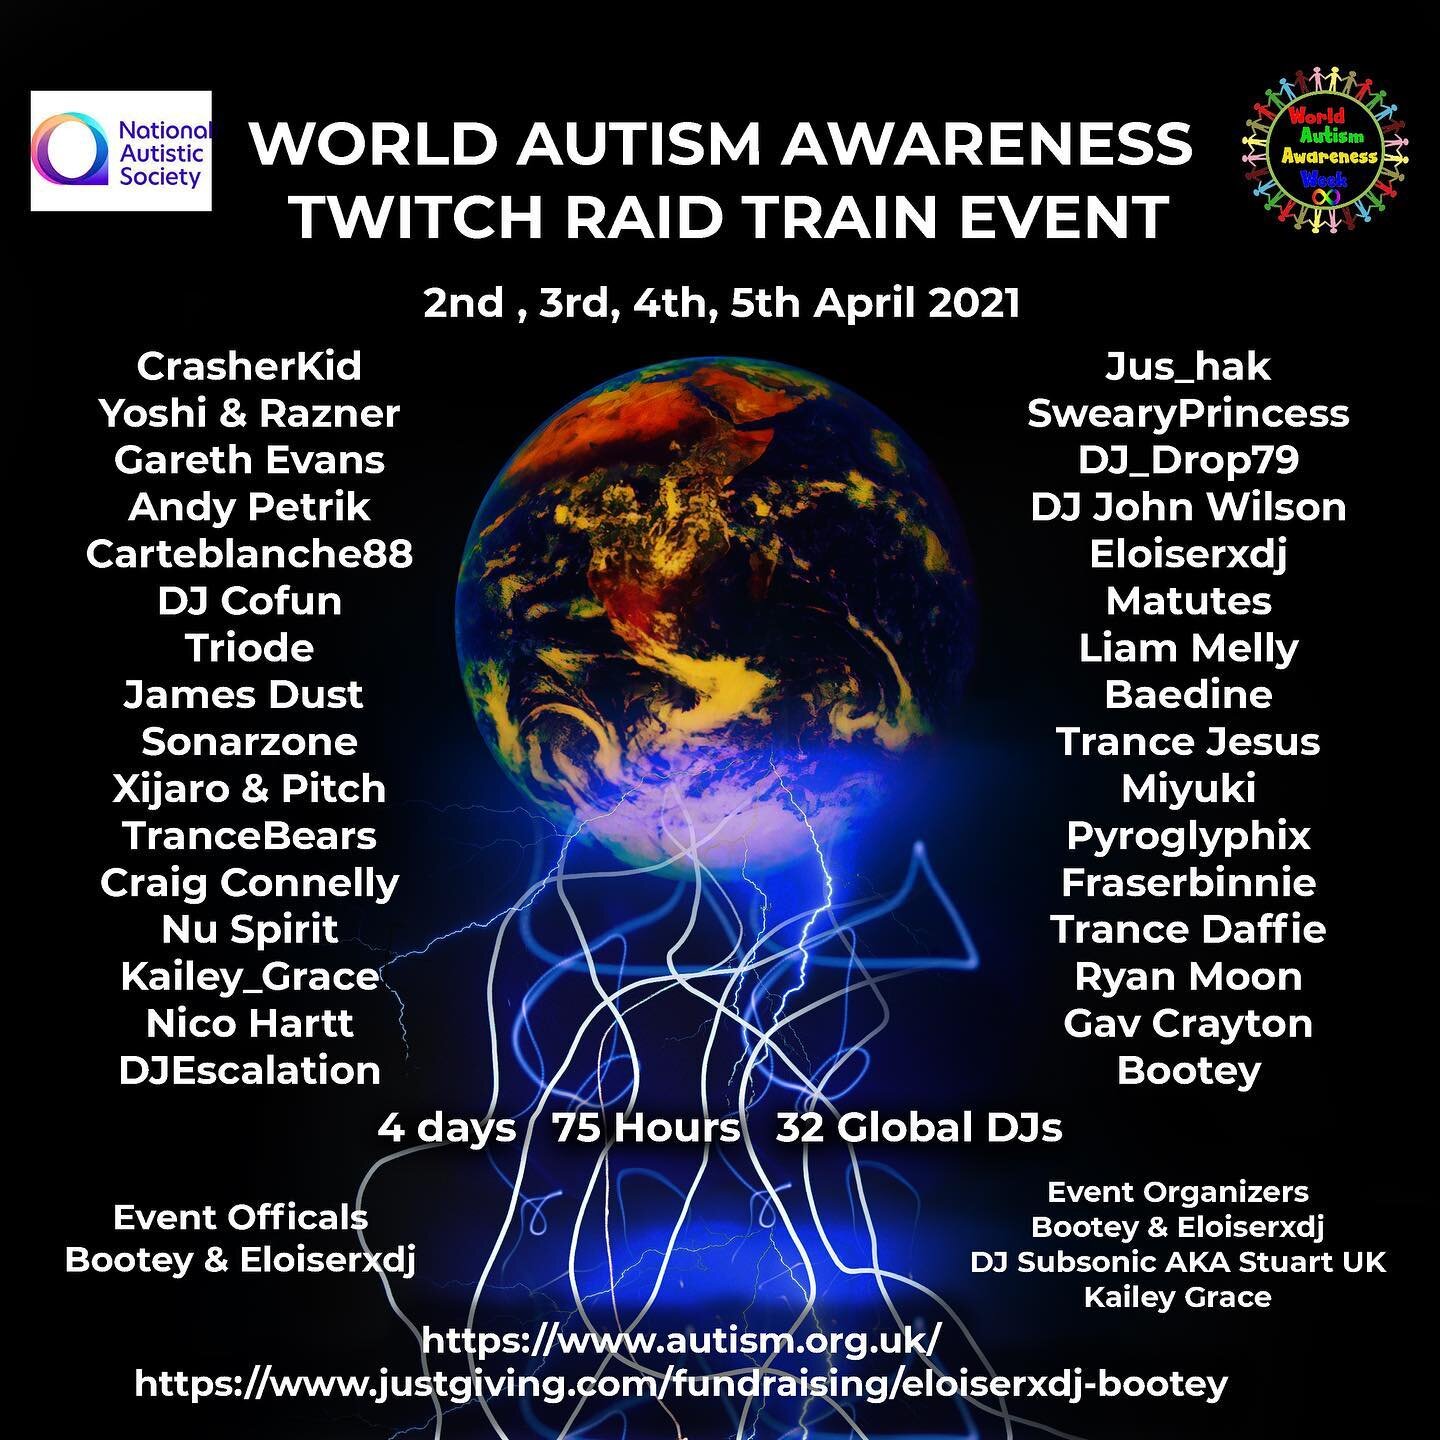 If you&rsquo;re not already tuned in you&rsquo;re missing out! Massive charity raid train this weekend raising funds during World Autism Awareness Week 💙🌎🌍🌏🙏🏼
.
I&rsquo;m honored and excited to be playing in this event helping the cause at 10pm